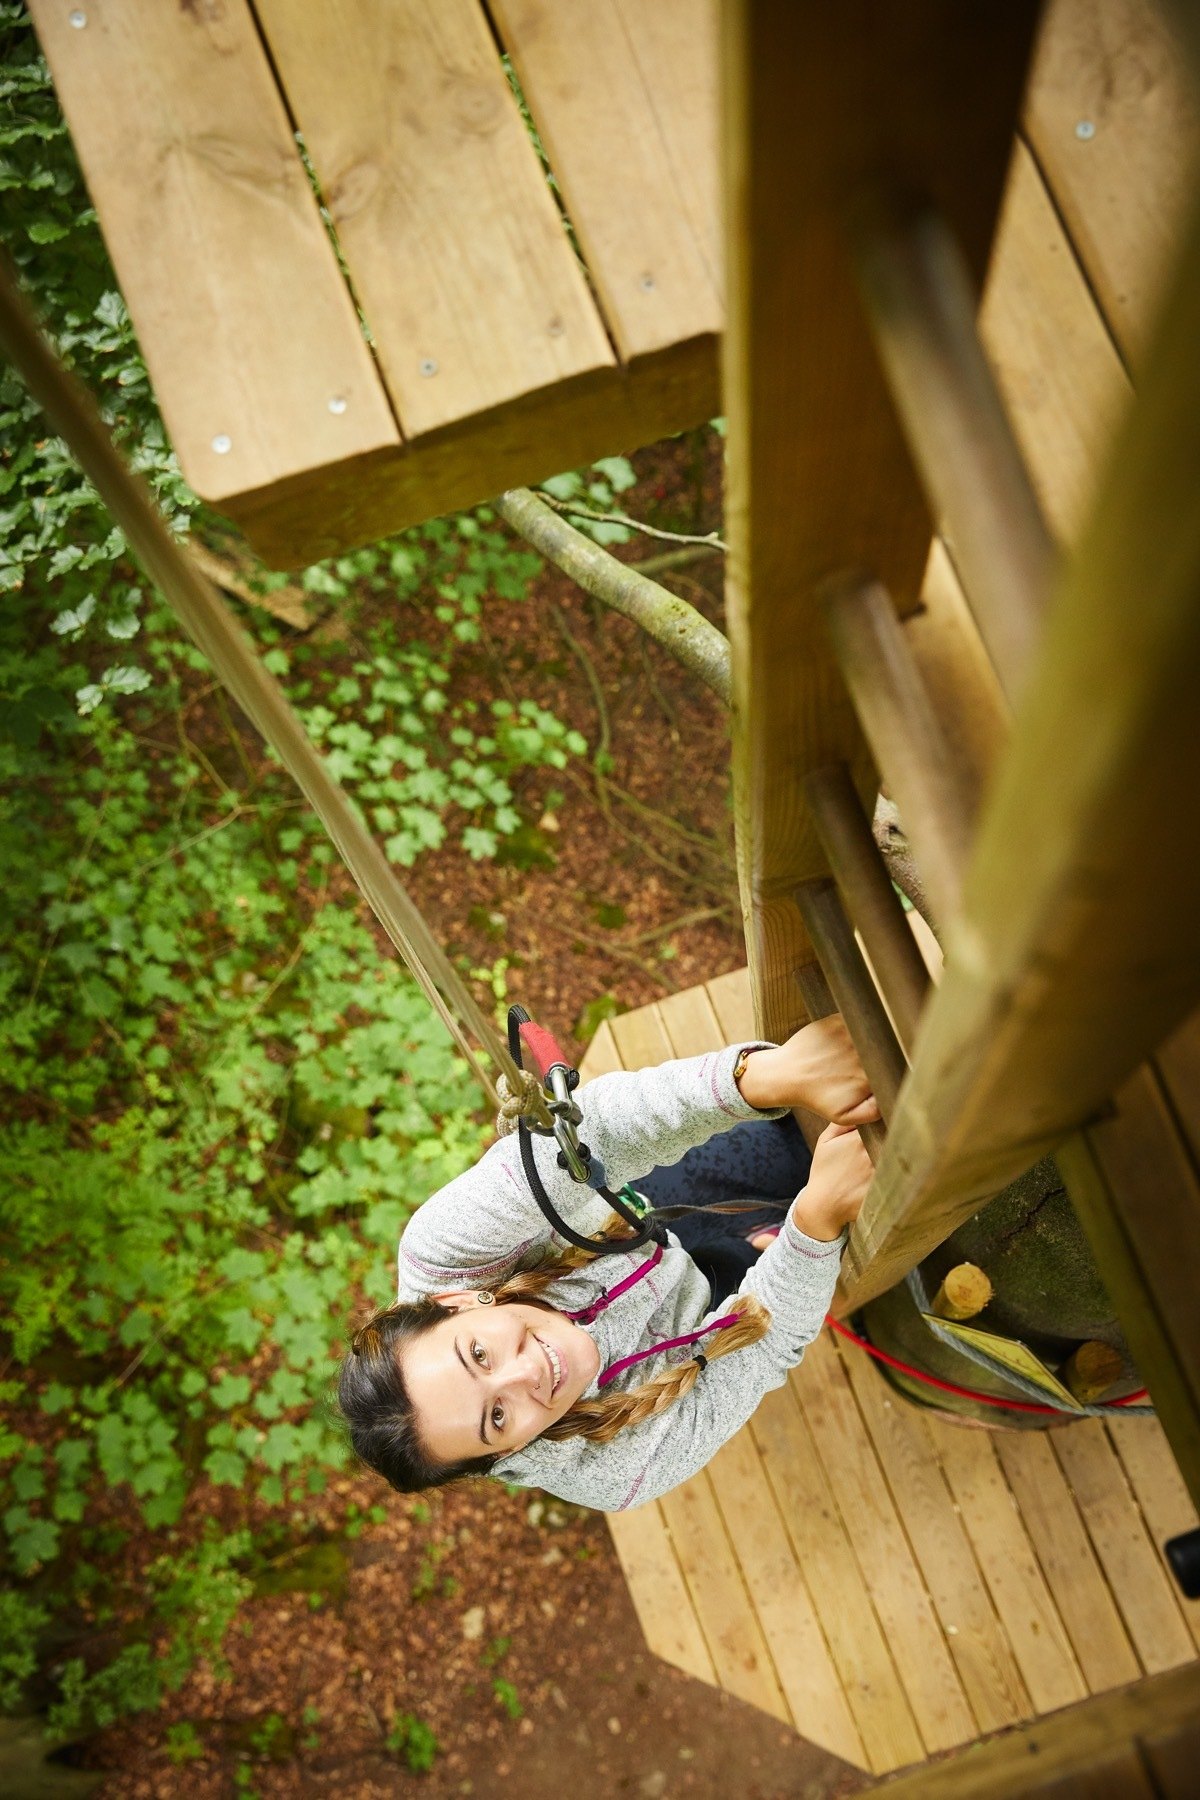 Go Ape in Alice Holt Forest